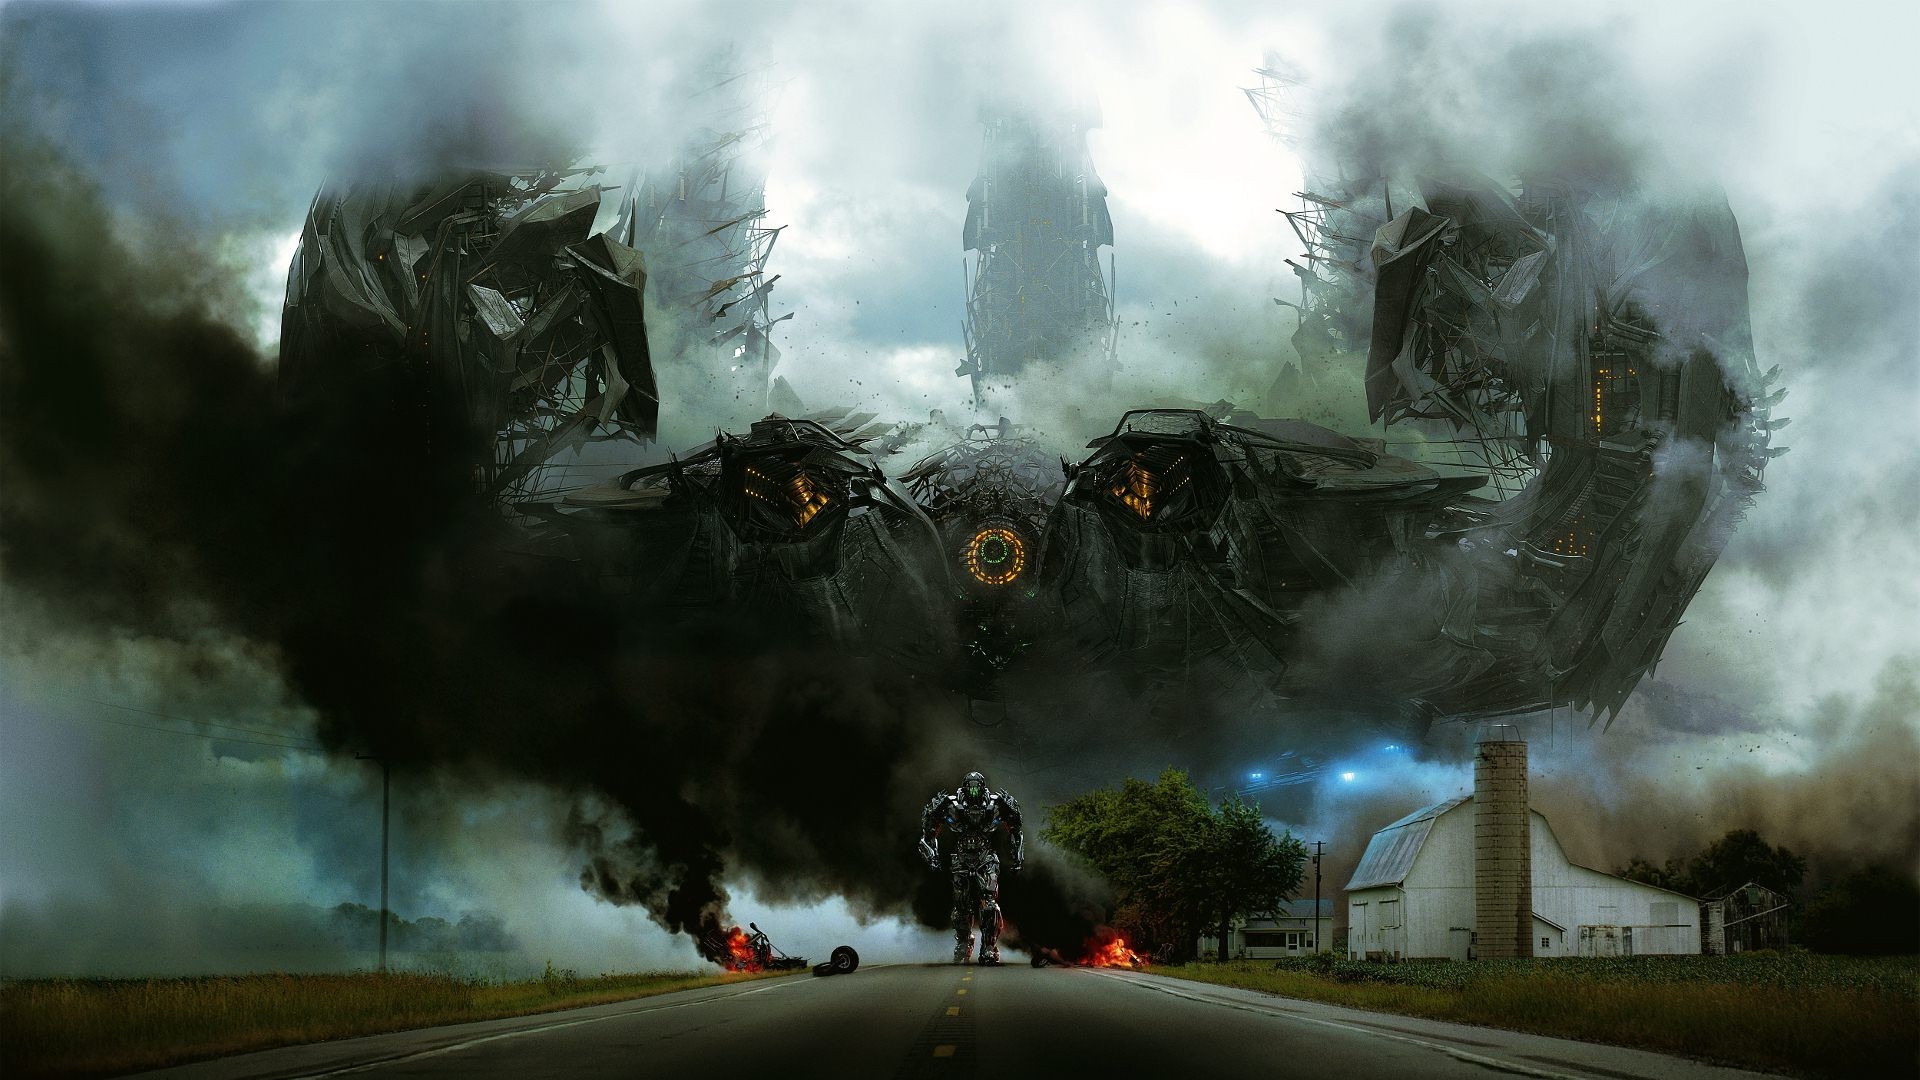 Transformers: Age of Extinction for ios download